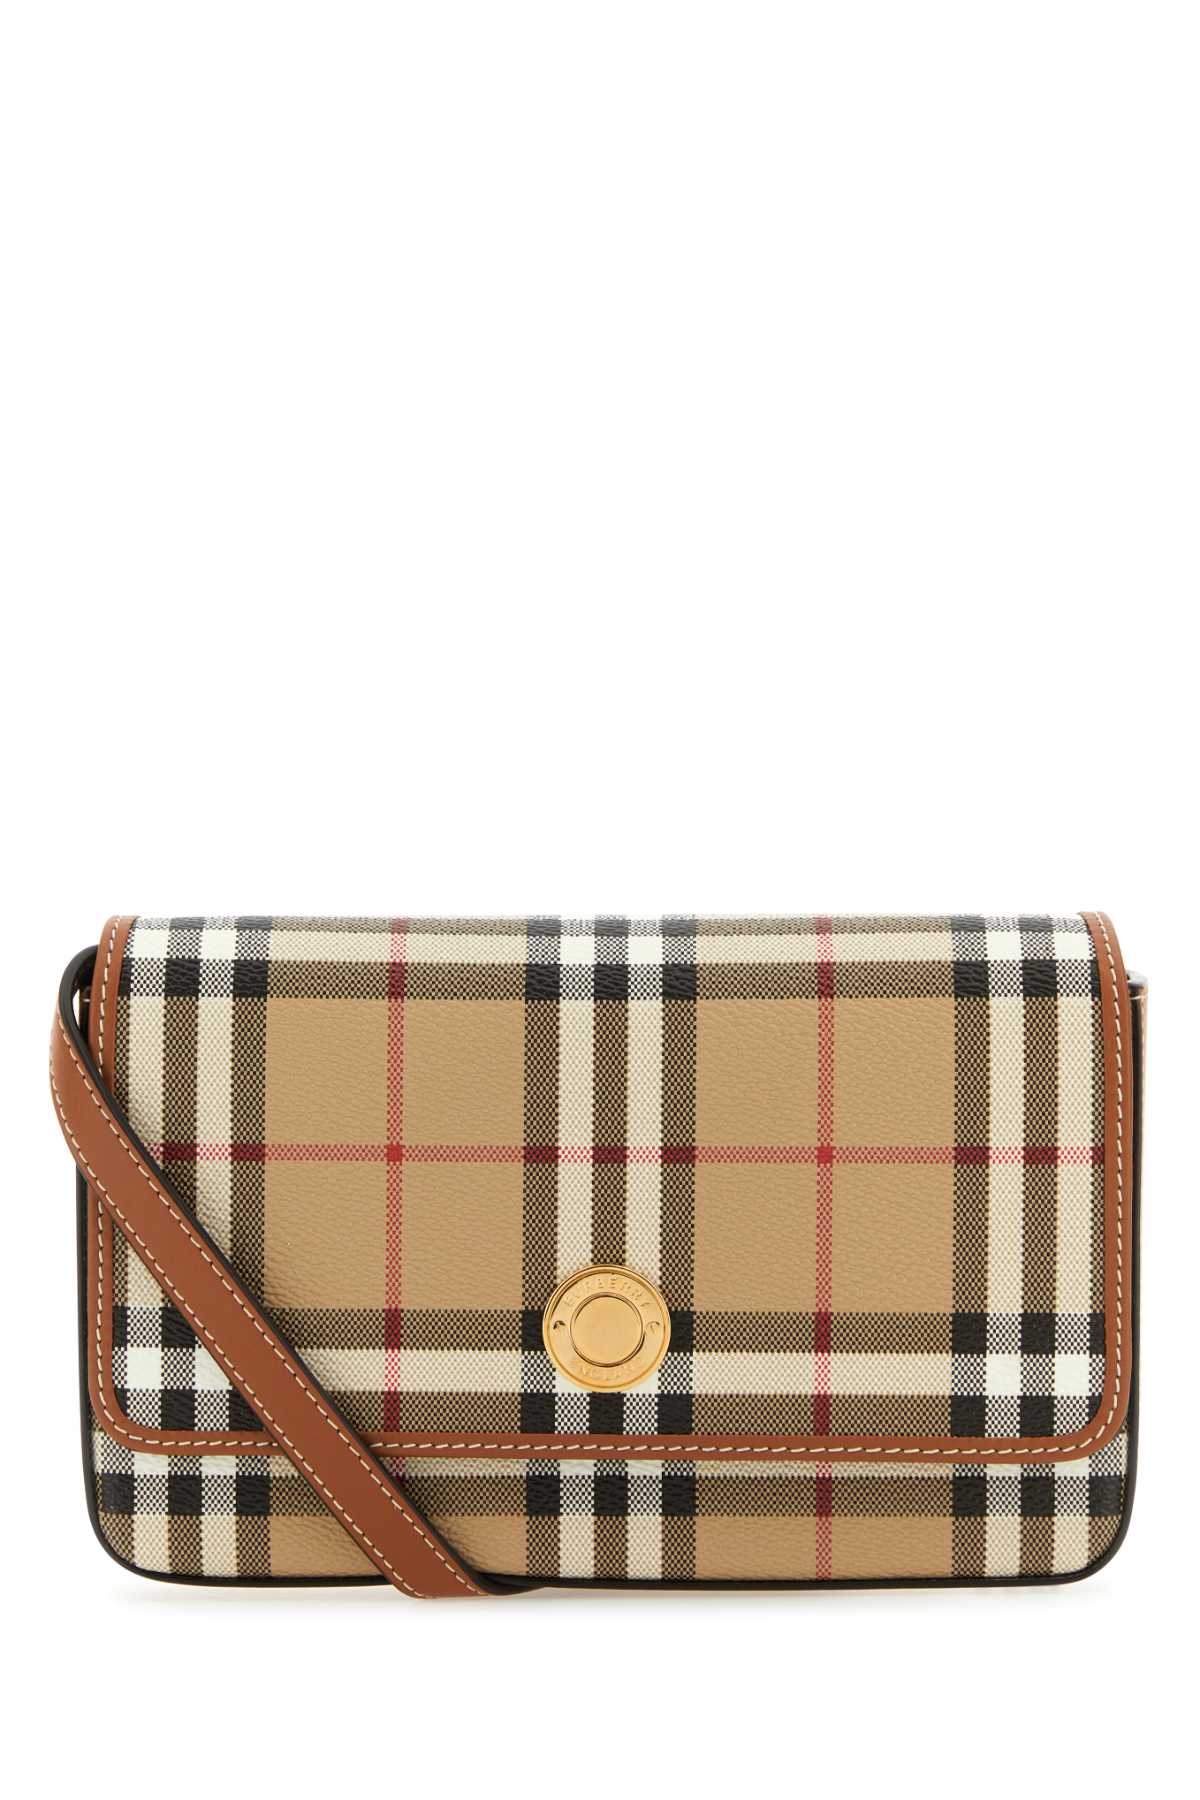 Burberry Printed Canvas Hampshire Crossbody Bag In Archivebeige